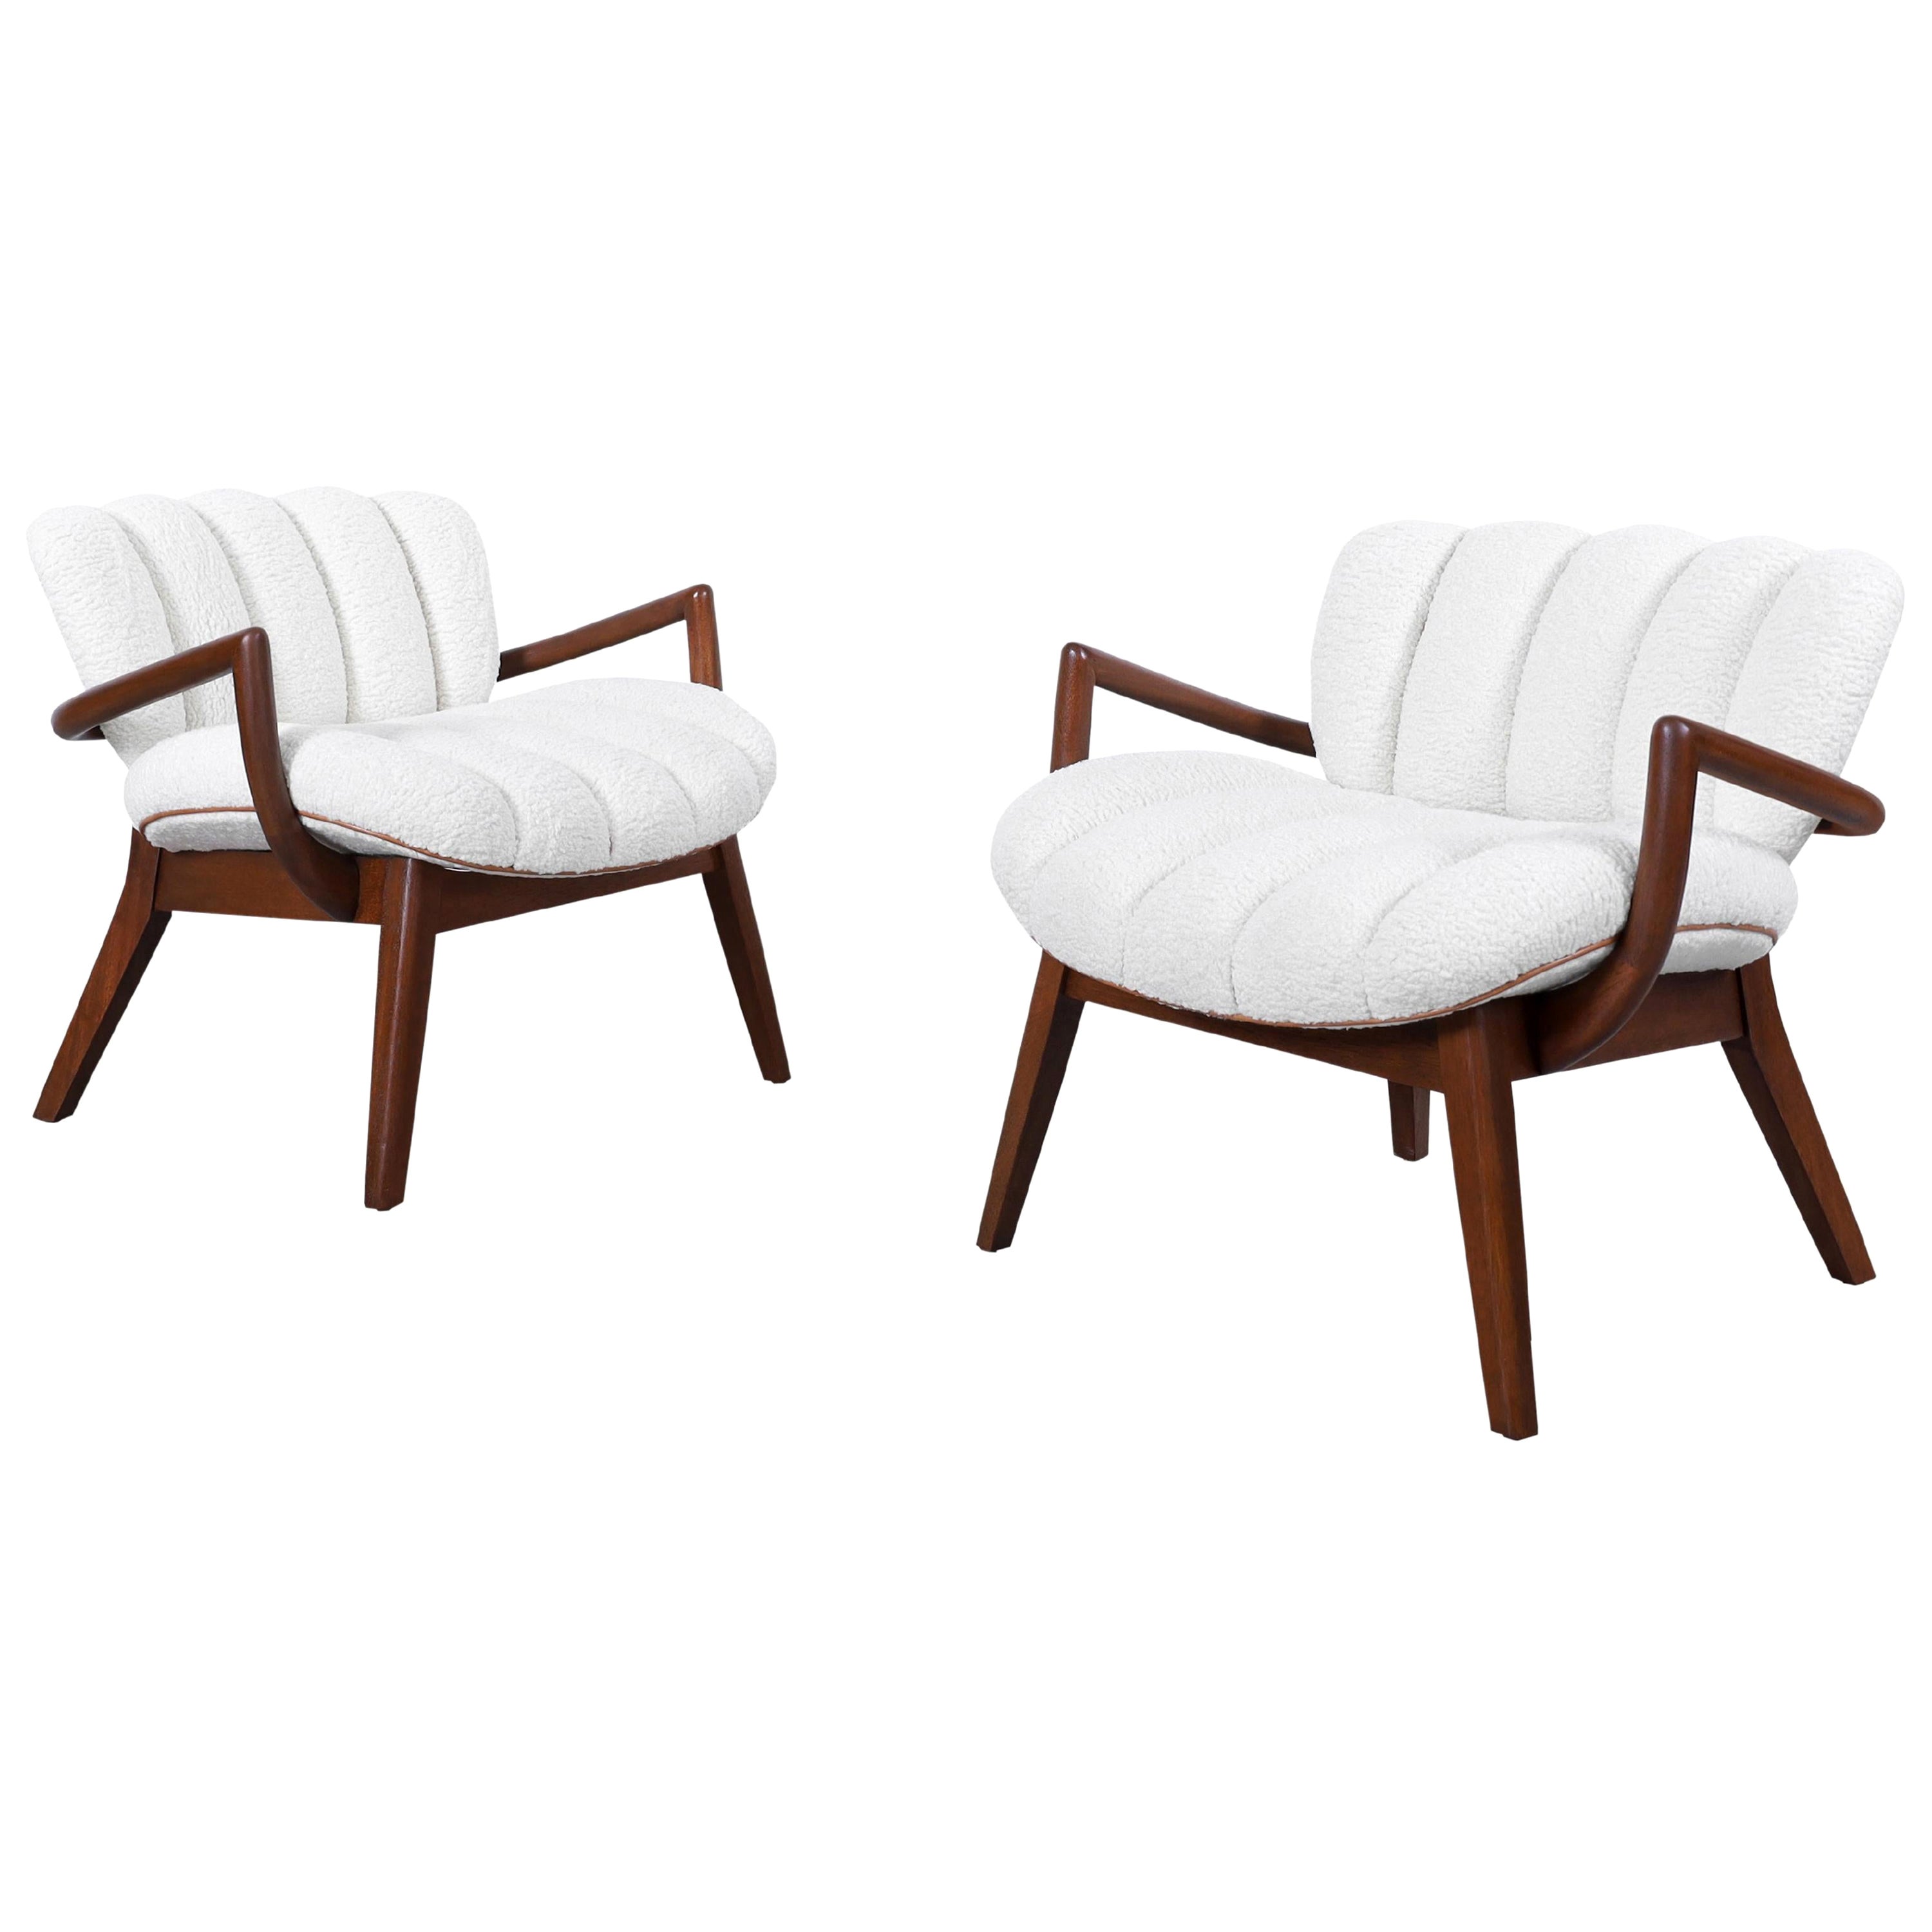 Rare Bouclé and Leather Arm Chairs by Paul Laszlo For Sale